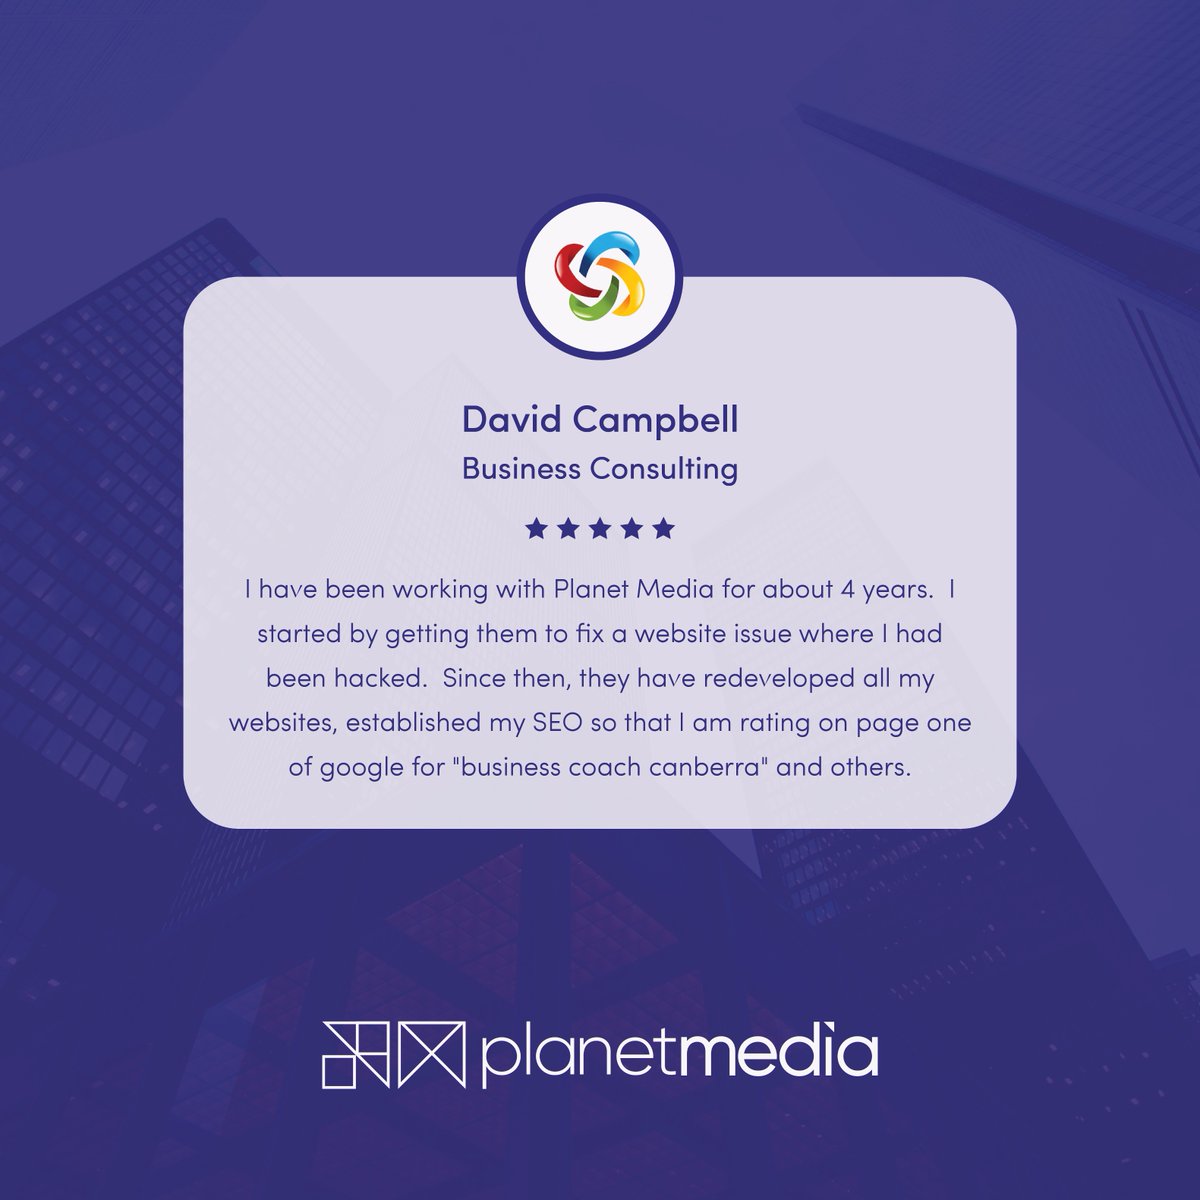 When our clients succeed, we succeed. See what one of our amazing clients had to say about their journey with Planetmedia! 🚀 💼 #planetmedia #marketing #advertsing #technology #creative #services #digitalmarketing #onlinemarketing #advertisingagency #targetedads #leadgeneration